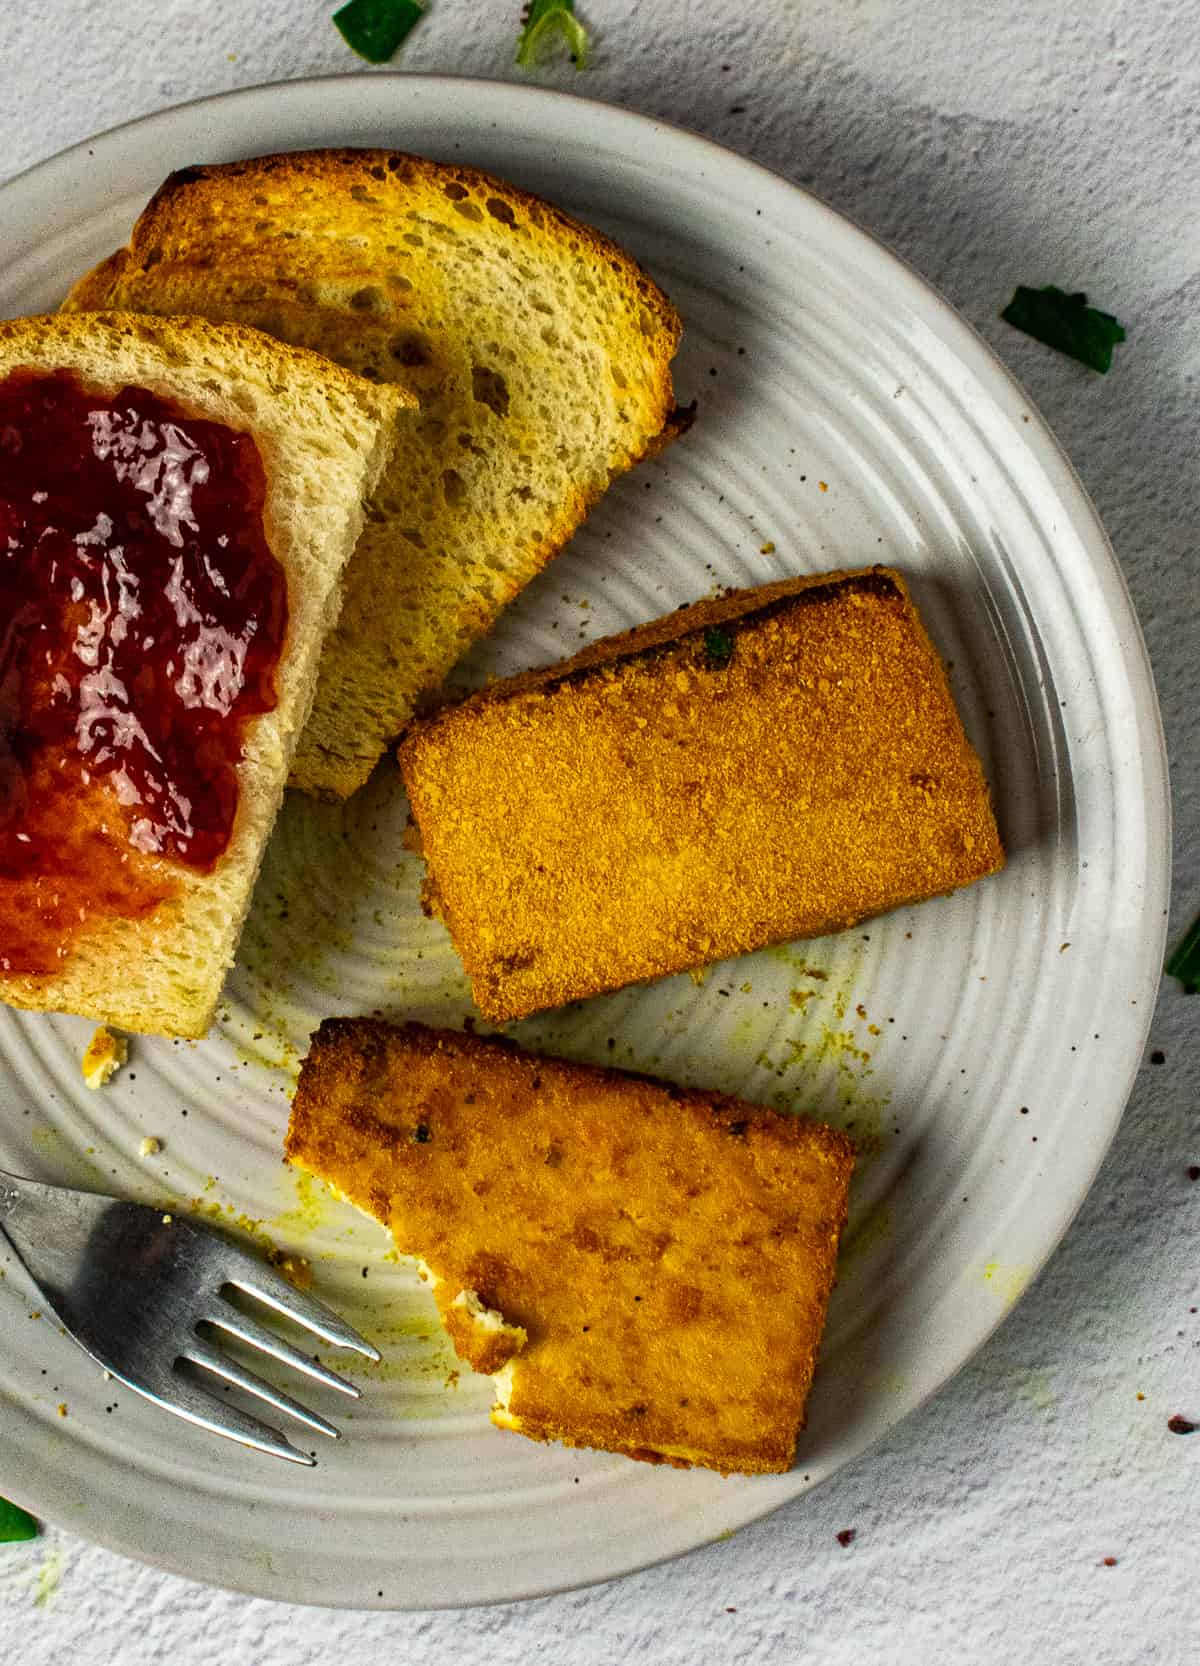 eggy tofu patties on plate with fork and toast